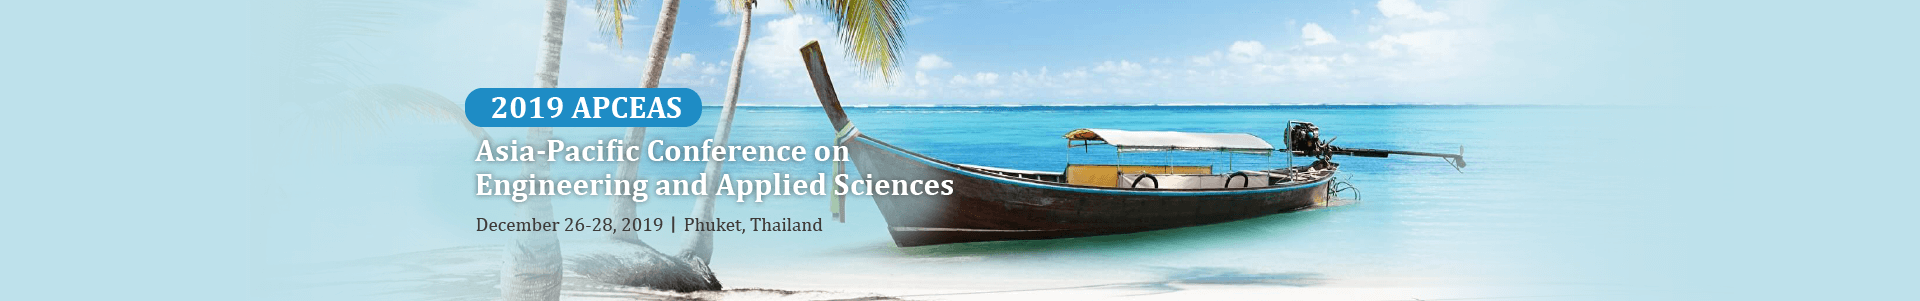 Asia-Pacific Conference on Engineering and Applied Sciences (APCEAS), Phuket, Thailand